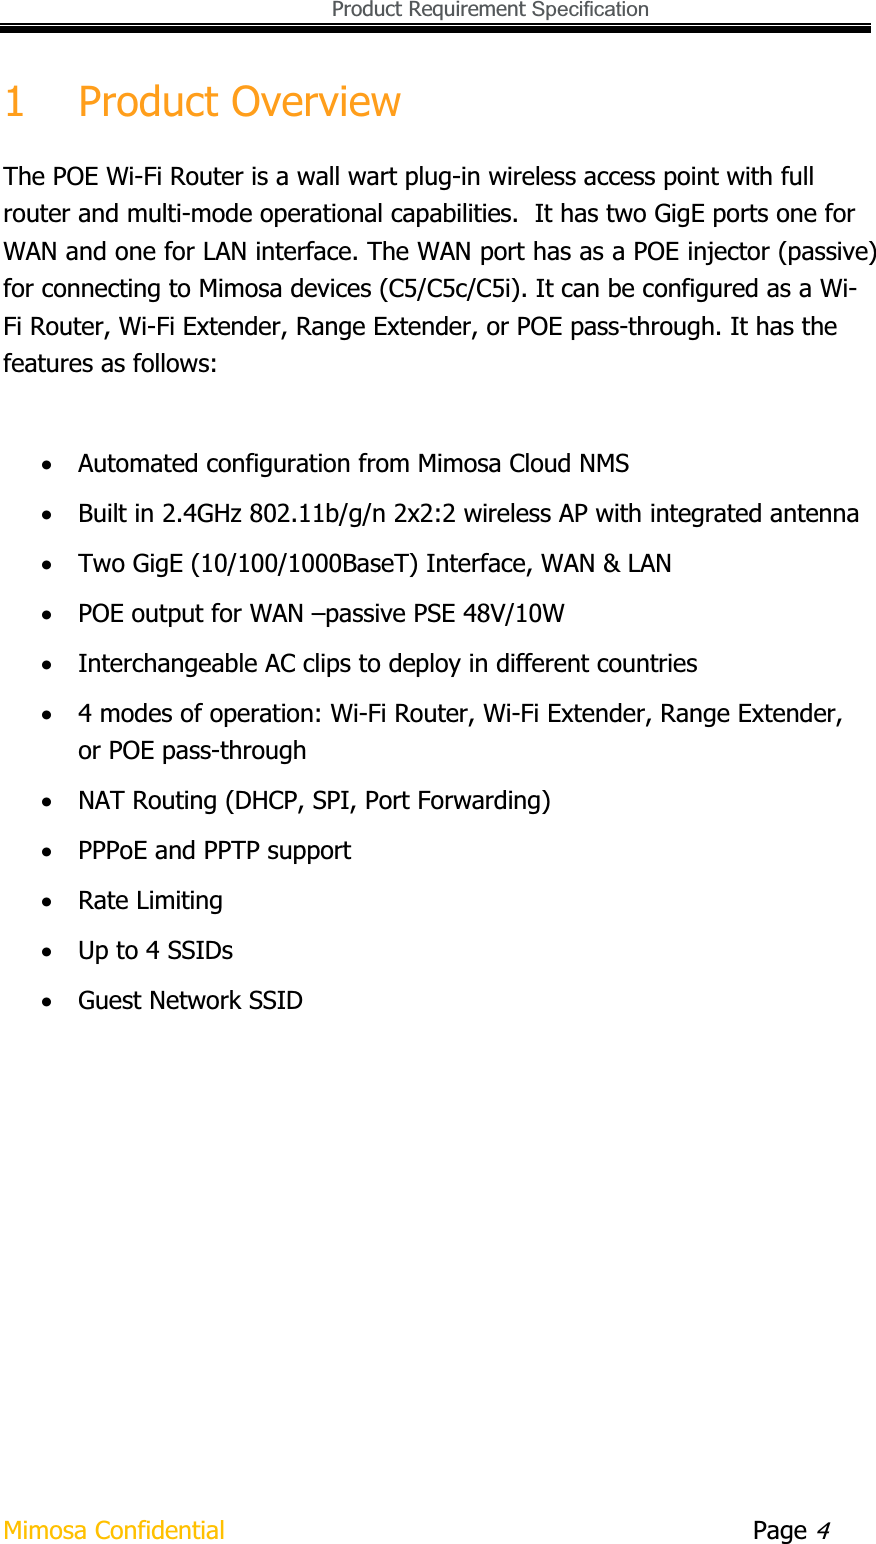   Product Requirement Specification Mimosa Confidential        Page 41 Product Overview The POE Wi-Fi Router is a wall wart plug-in wireless access point with full router and multi-mode operational capabilities.  It has two GigE ports one for WAN and one for LAN interface. The WAN port has as a POE injector (passive) for connecting to Mimosa devices (C5/C5c/C5i). It can be configured as a Wi-Fi Router, Wi-Fi Extender, Range Extender, or POE pass-through. It has the features as follows: xAutomated configuration from Mimosa Cloud NMS xBuilt in 2.4GHz 802.11b/g/n 2x2:2 wireless AP with integrated antenna xTwo GigE (10/100/1000BaseT) Interface, WAN &amp; LAN xPOE output for WAN –passive PSE 48V/10W xInterchangeable AC clips to deploy in different countries x4 modes of operation: Wi-Fi Router, Wi-Fi Extender, Range Extender, or POE pass-through xNAT Routing (DHCP, SPI, Port Forwarding) xPPPoE and PPTP support xRate Limiting xUp to 4 SSIDs xGuest Network SSID 